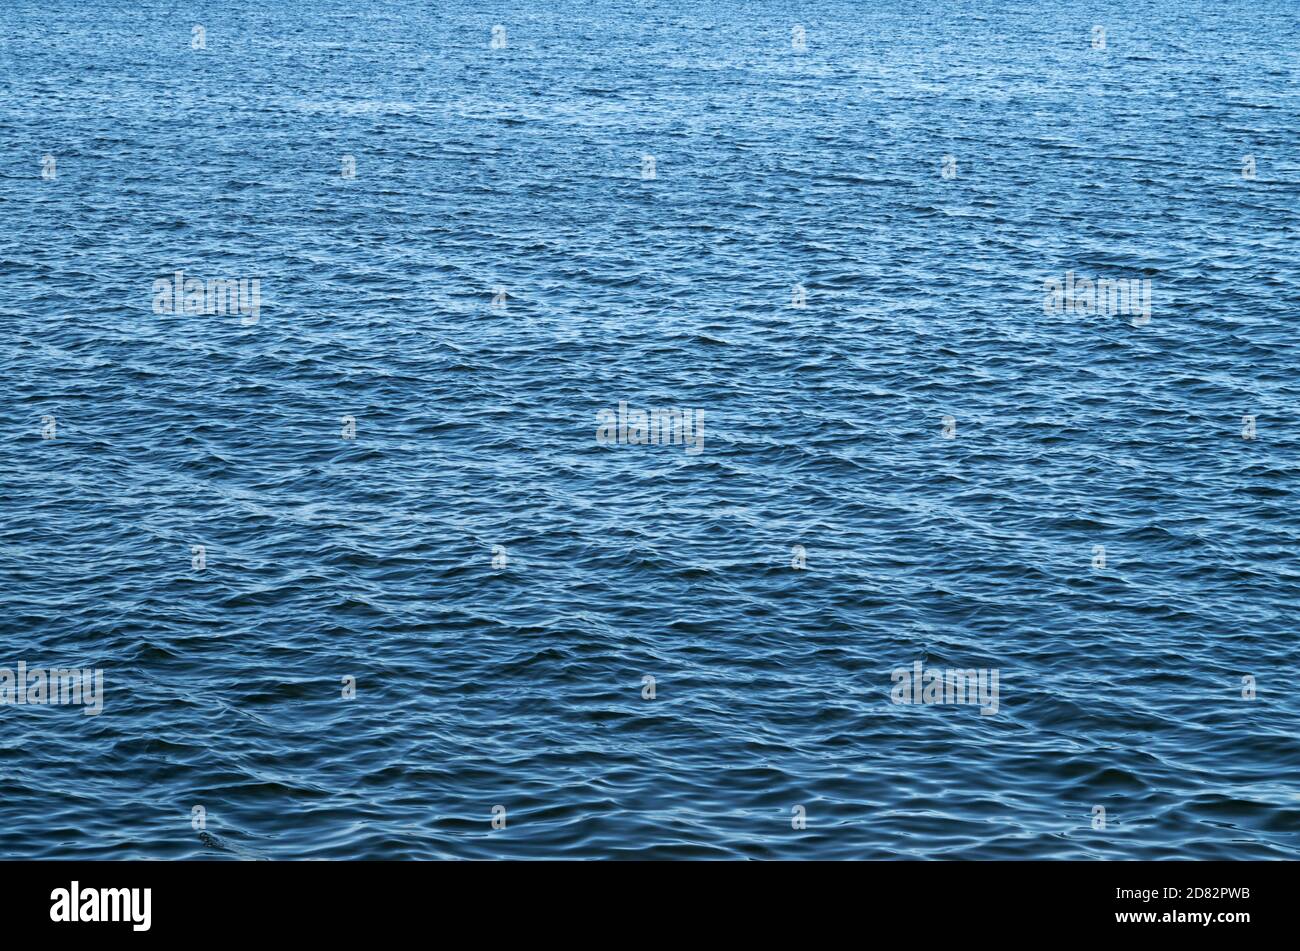 why does sea water appear blue and is sea water blue because it is reflecting the color of the sky